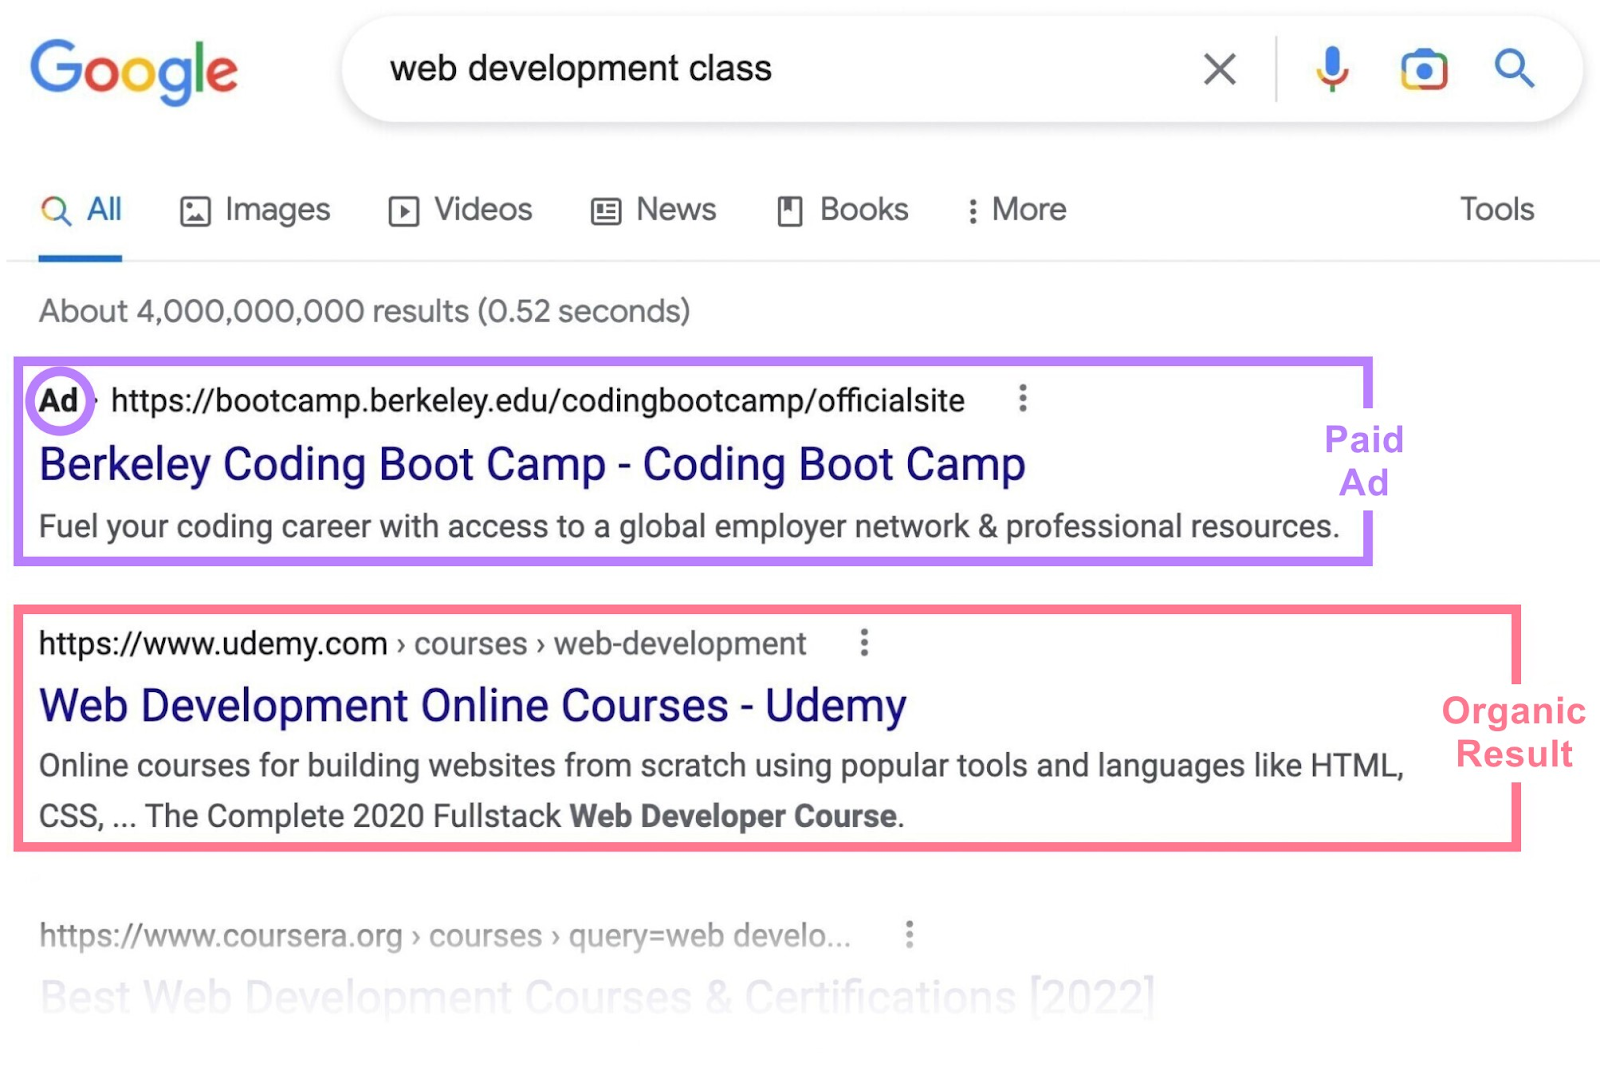 Google results page for "web development class" showing an ad for Barkly Coding Boot Camp